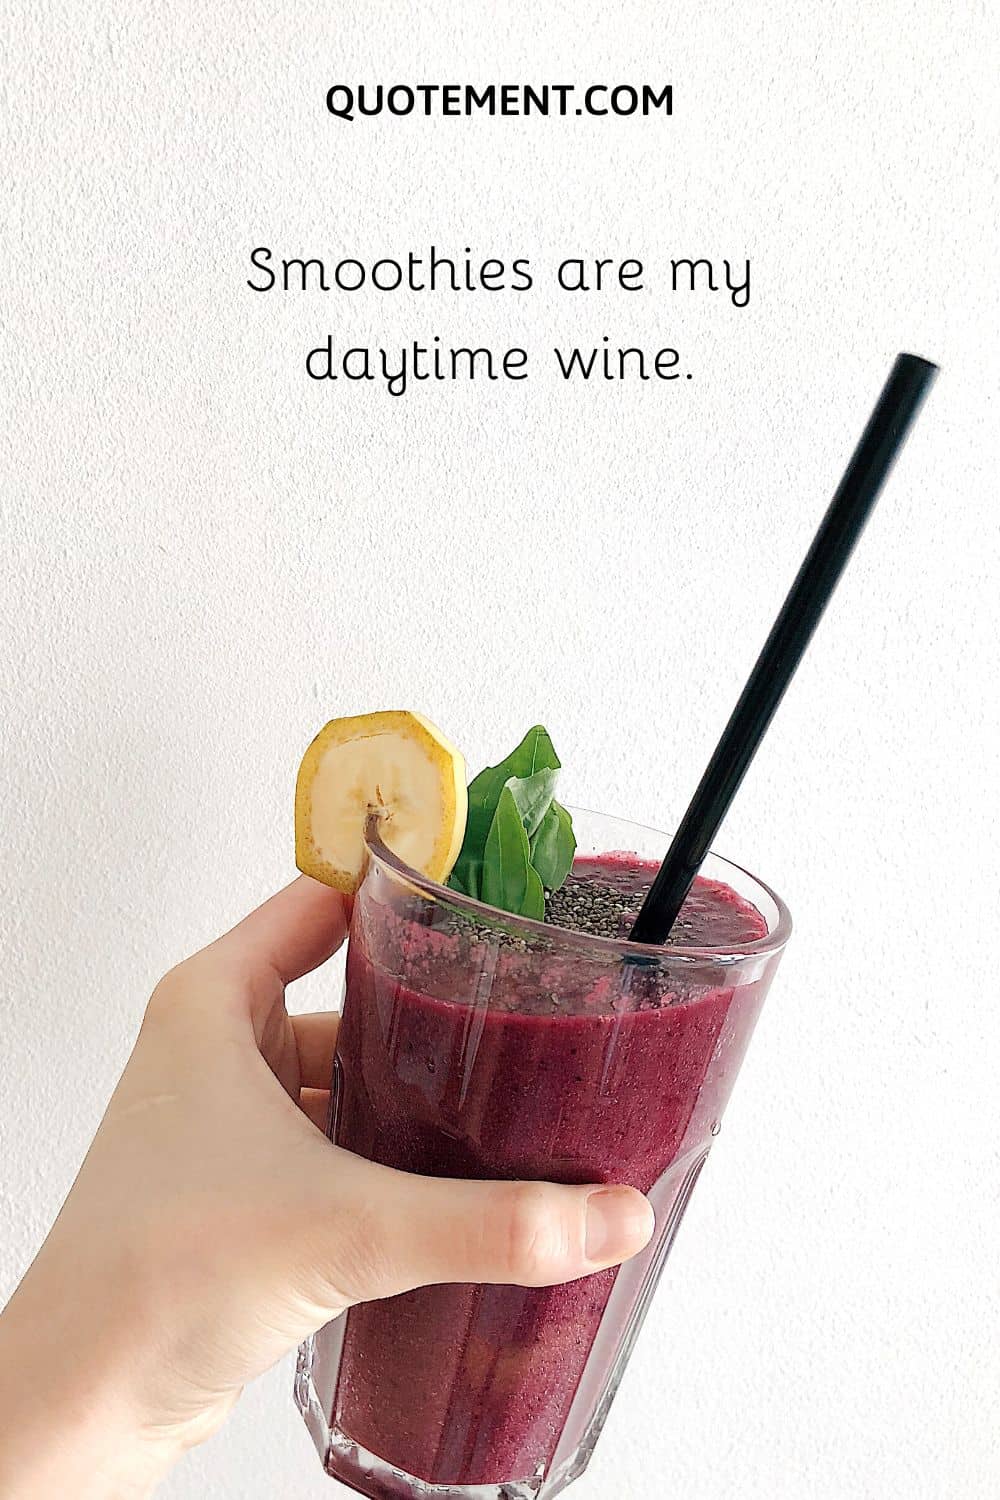 Smoothies are my daytime wine.